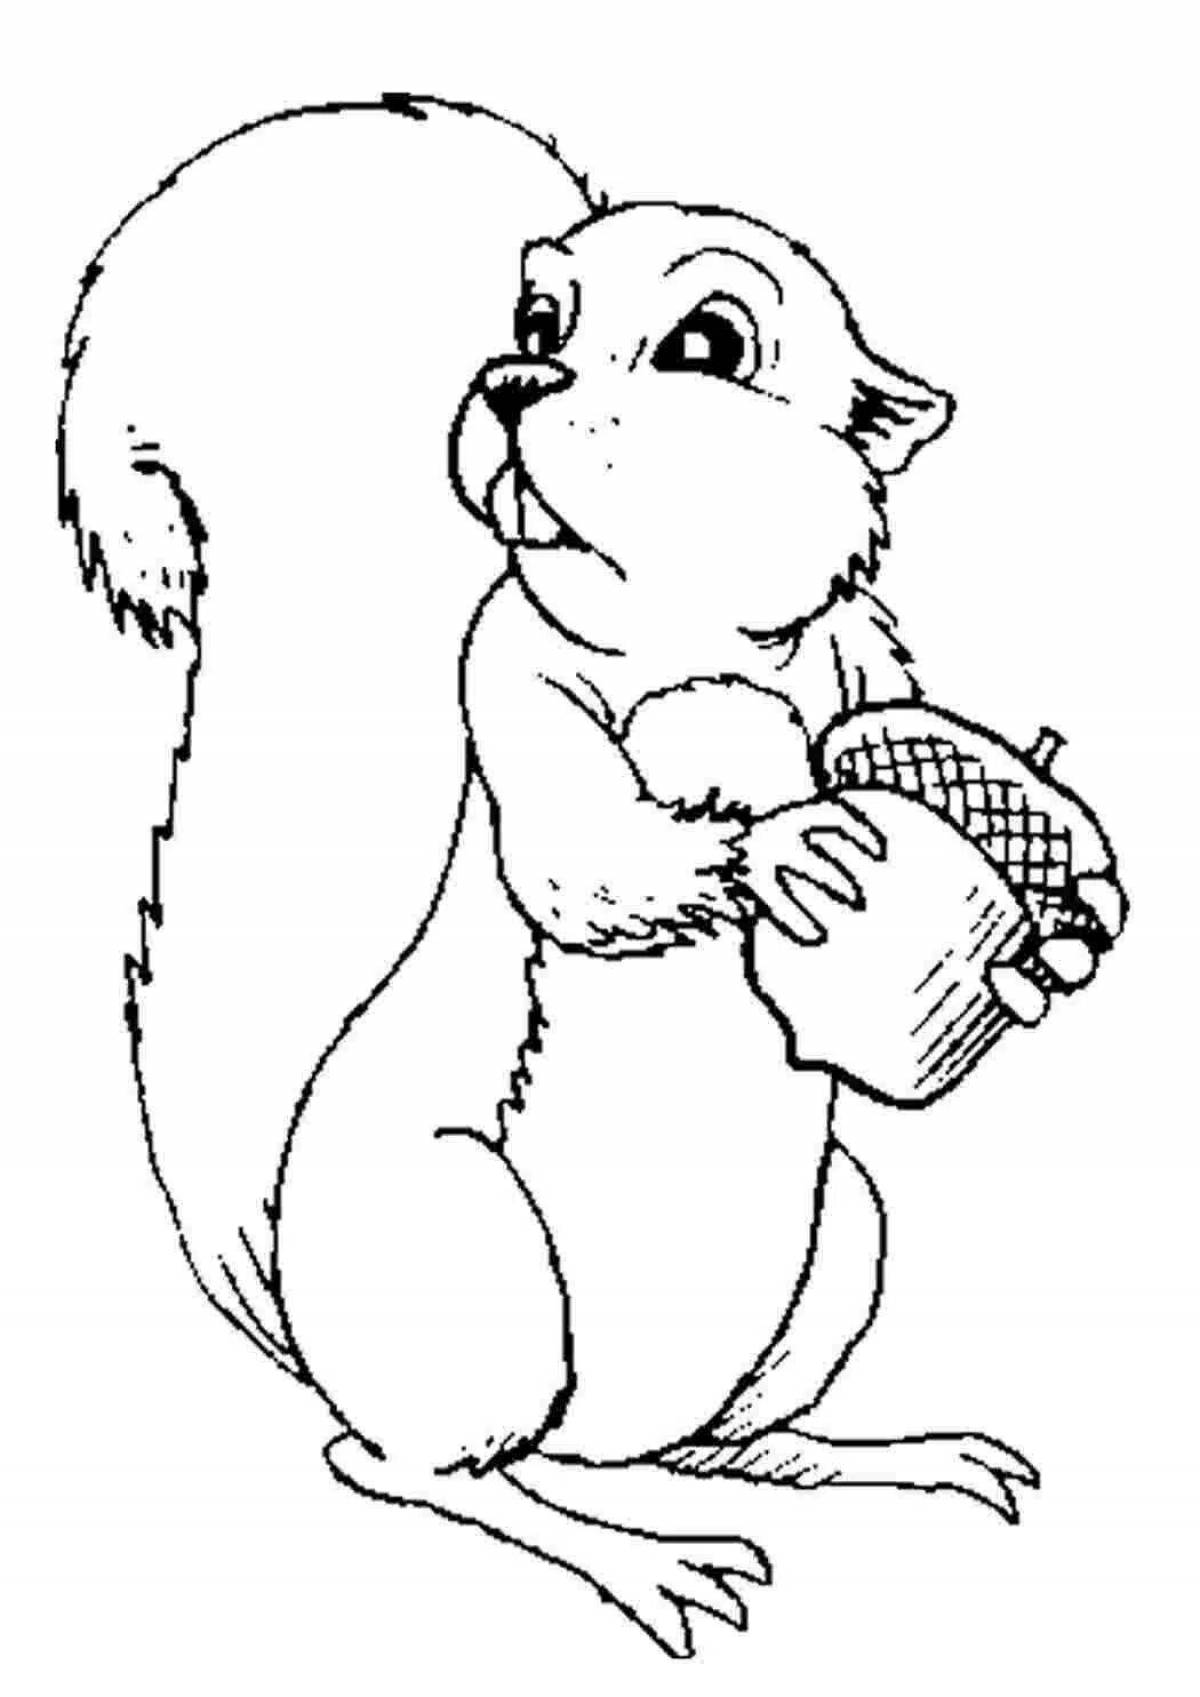 A fascinating drawing of a squirrel